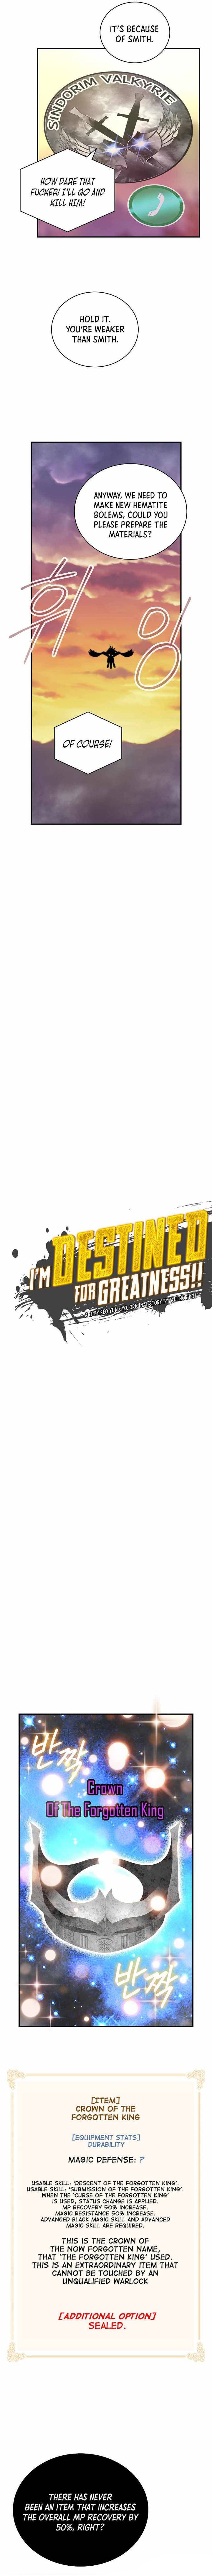 im_destined_for_greatness_104_2